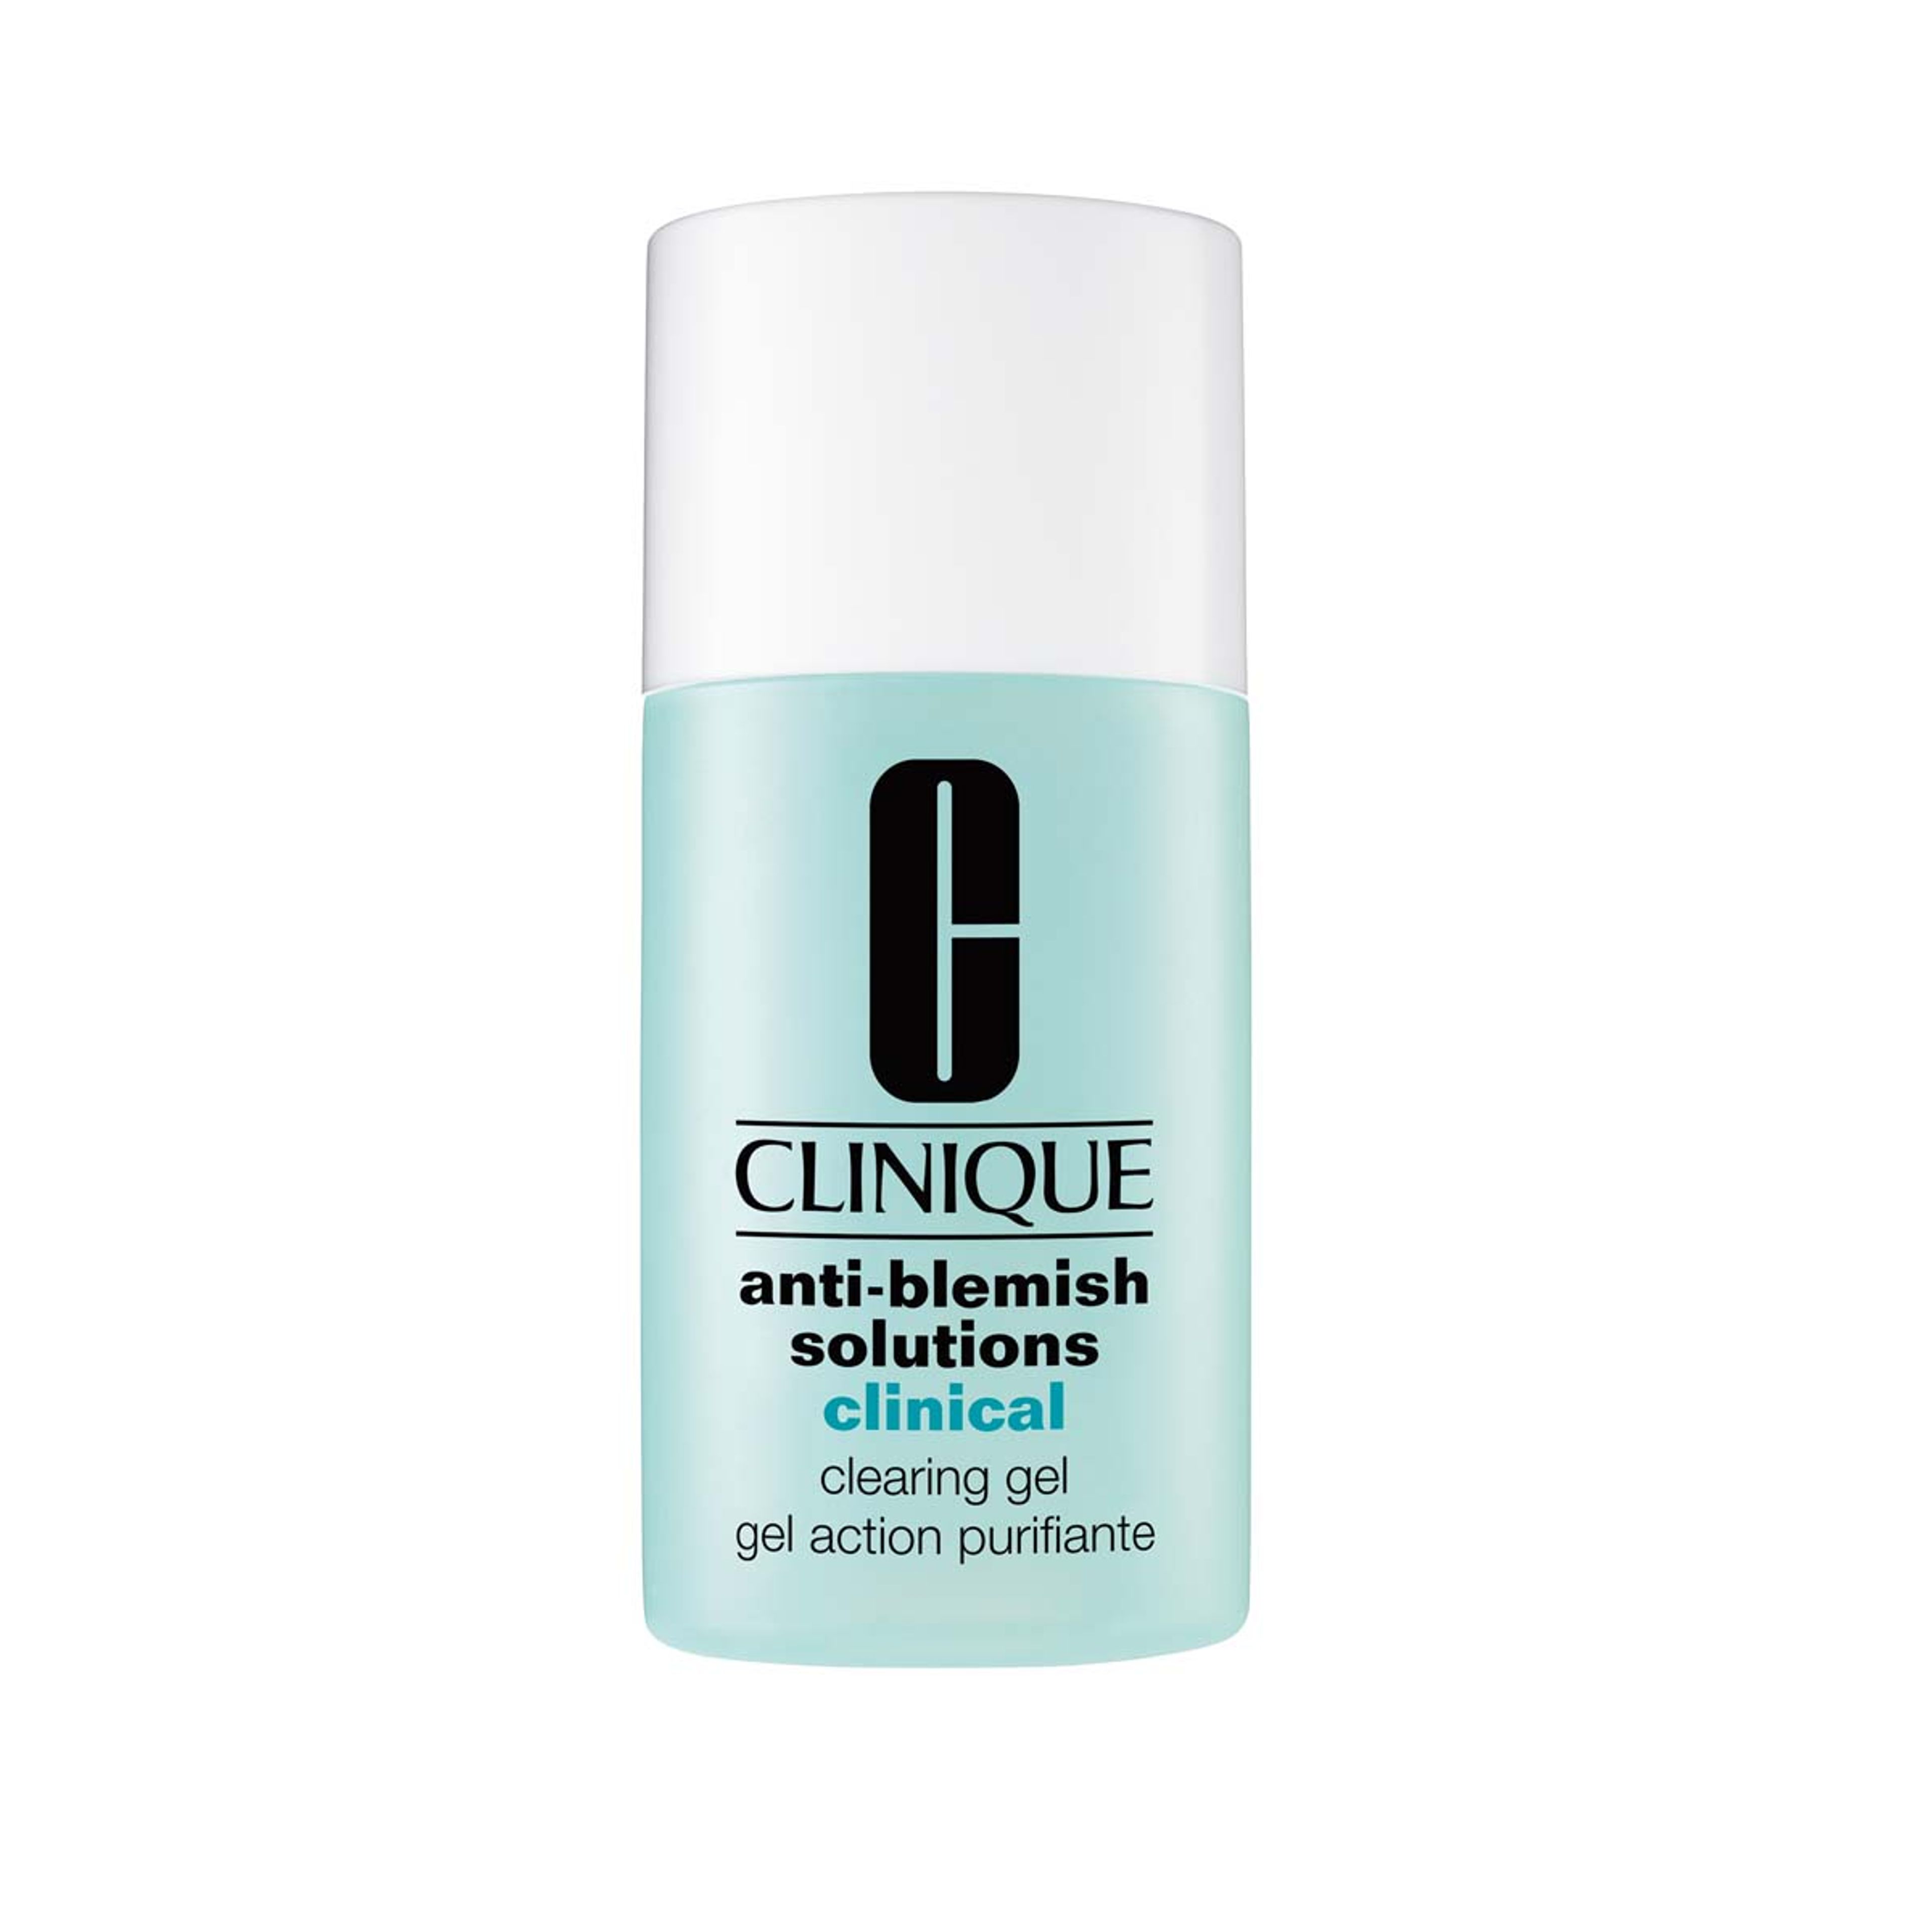 Clinique Anti-blemish Solutions Clinical Clearing Gel 1